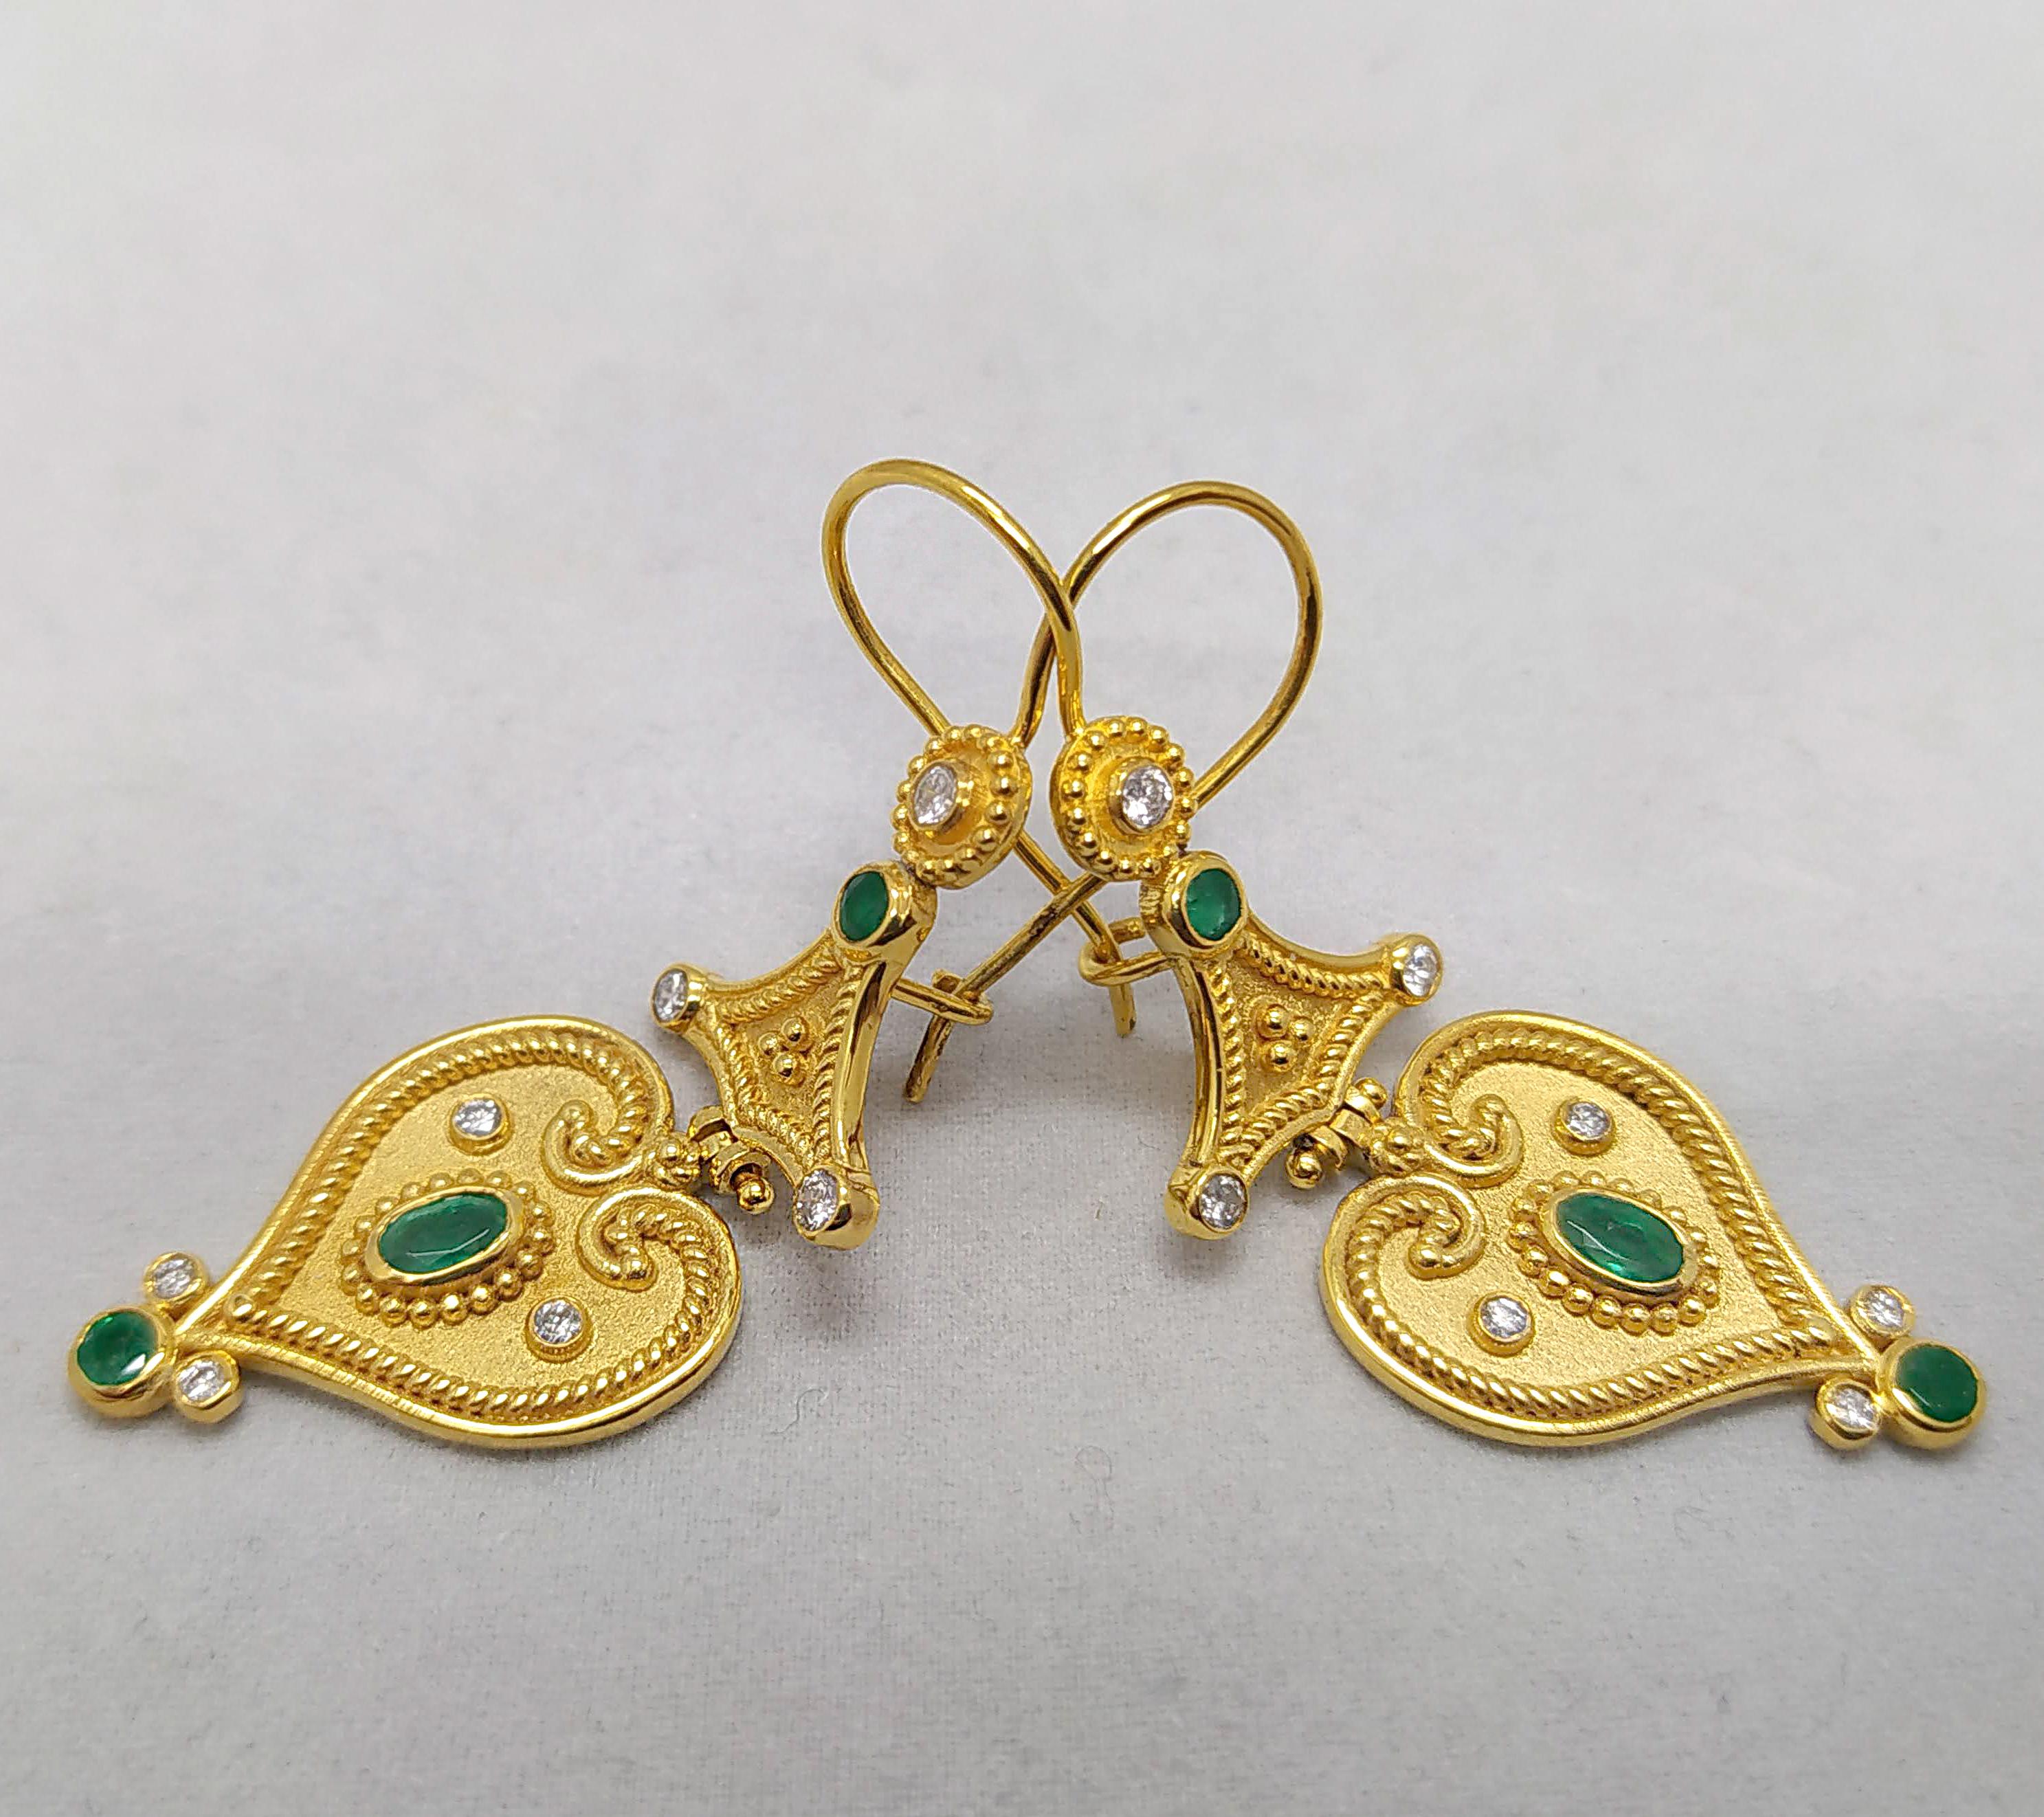 These S.Georgios 18 Karat Yellow Gold gorgeous designer earrings are decorated with hand made Byzantine-era style bead granulation workmanship done all microscopically, and finished with a unique velvet background. These beautiful heart shape